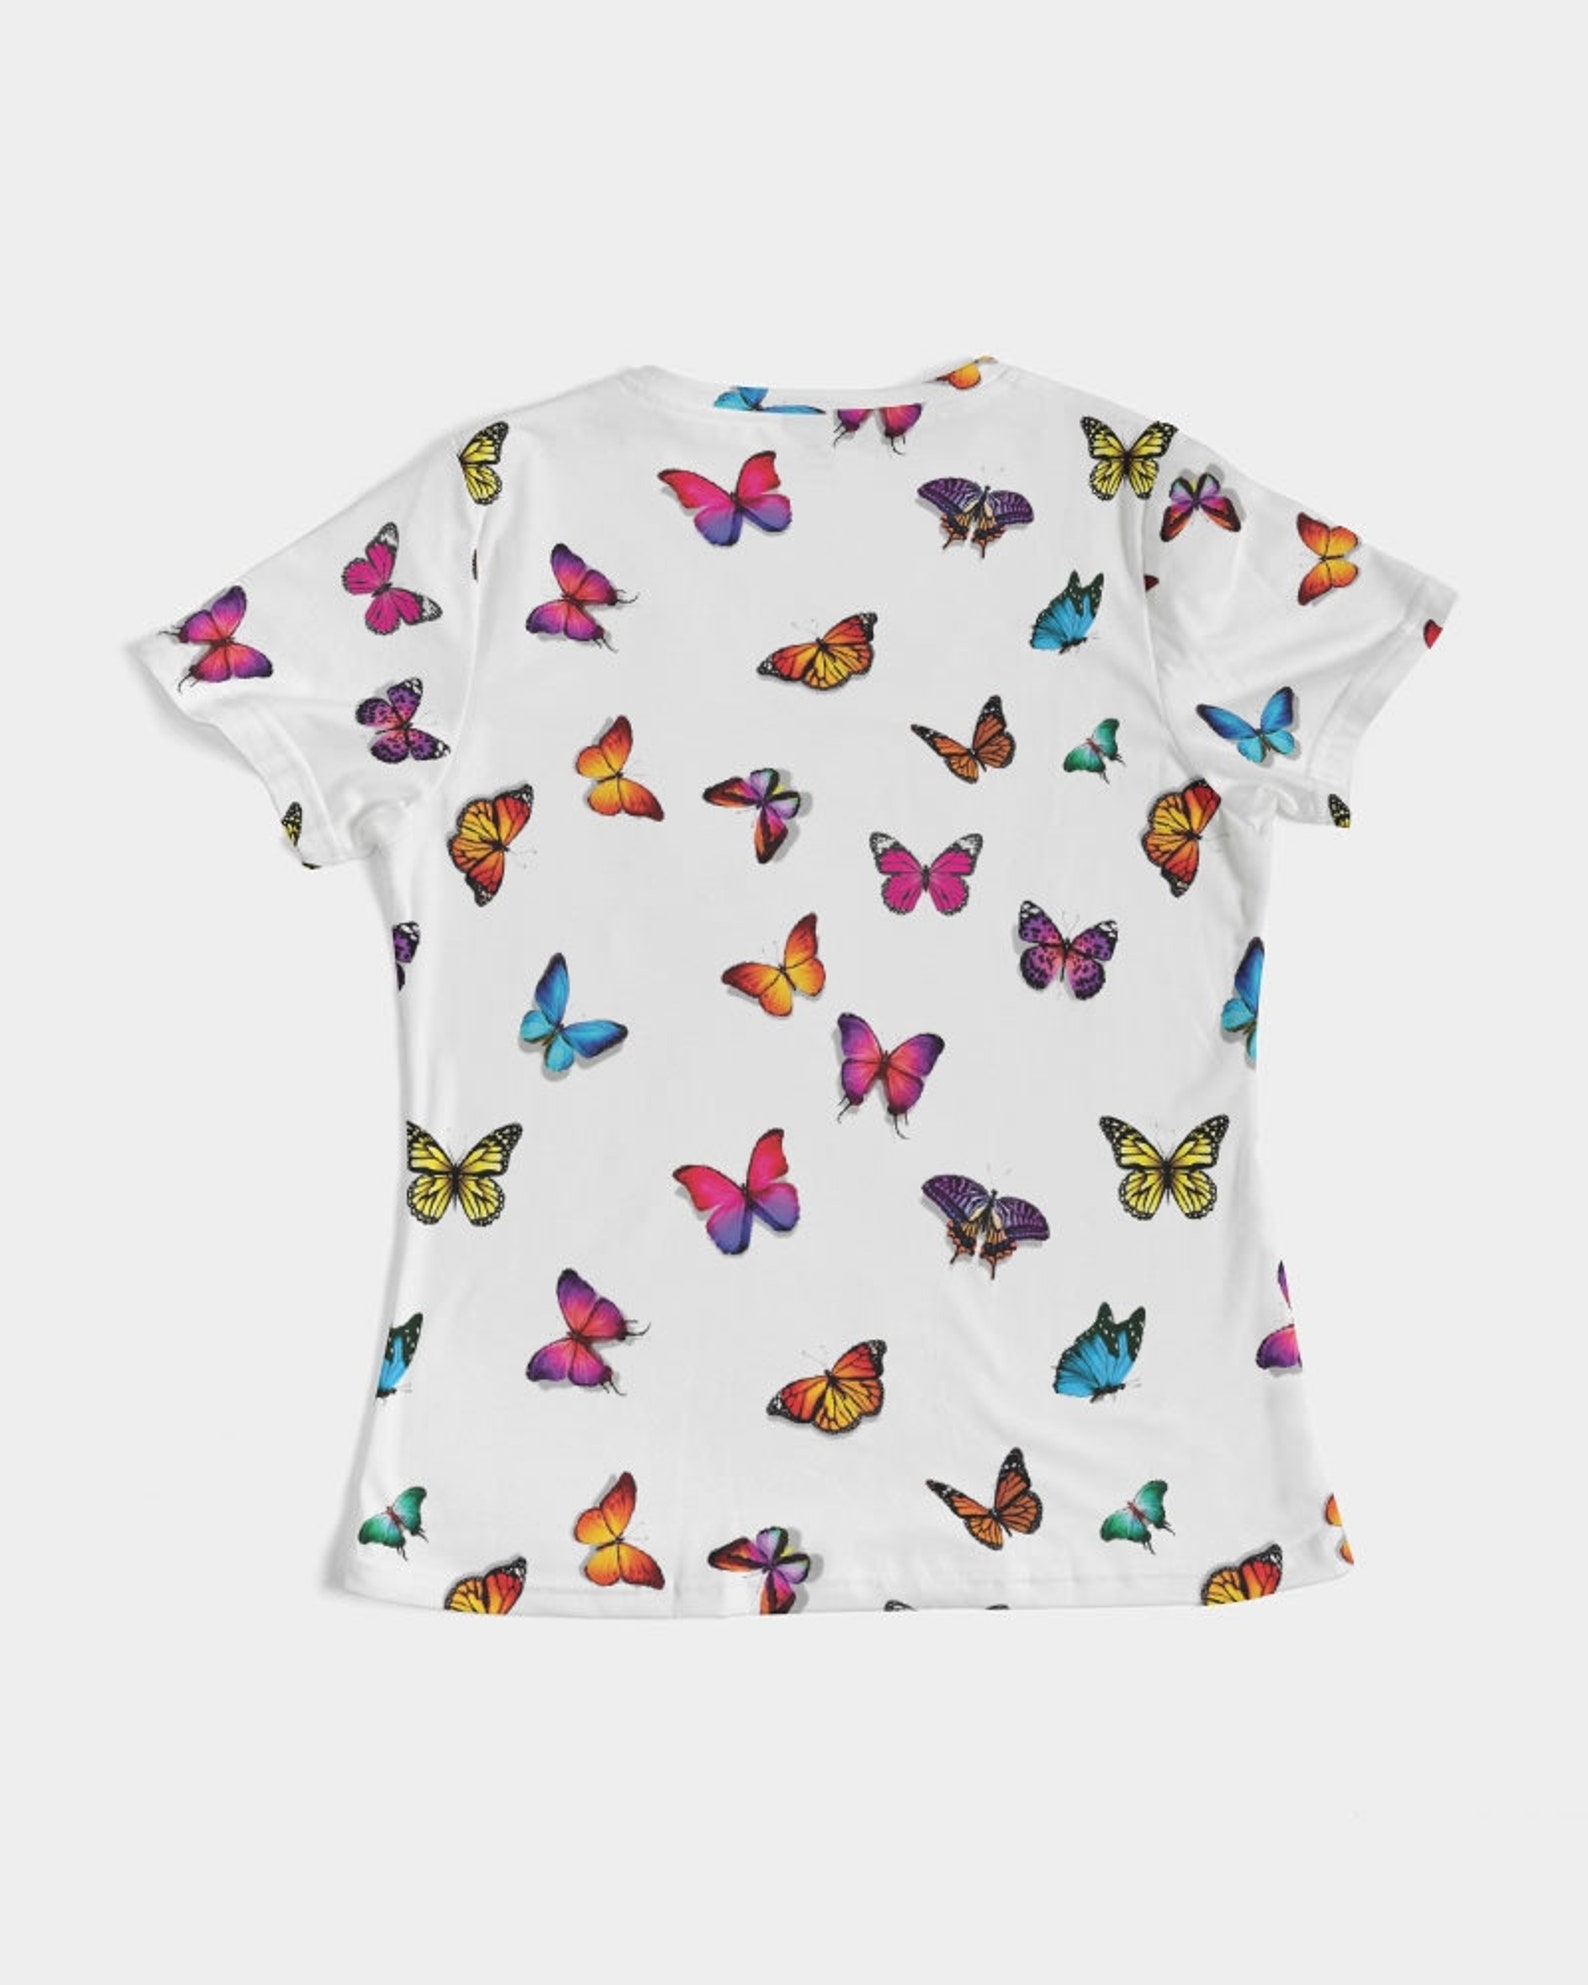 Butterfly Woman's Tee Butterfly Shirt | Etsy